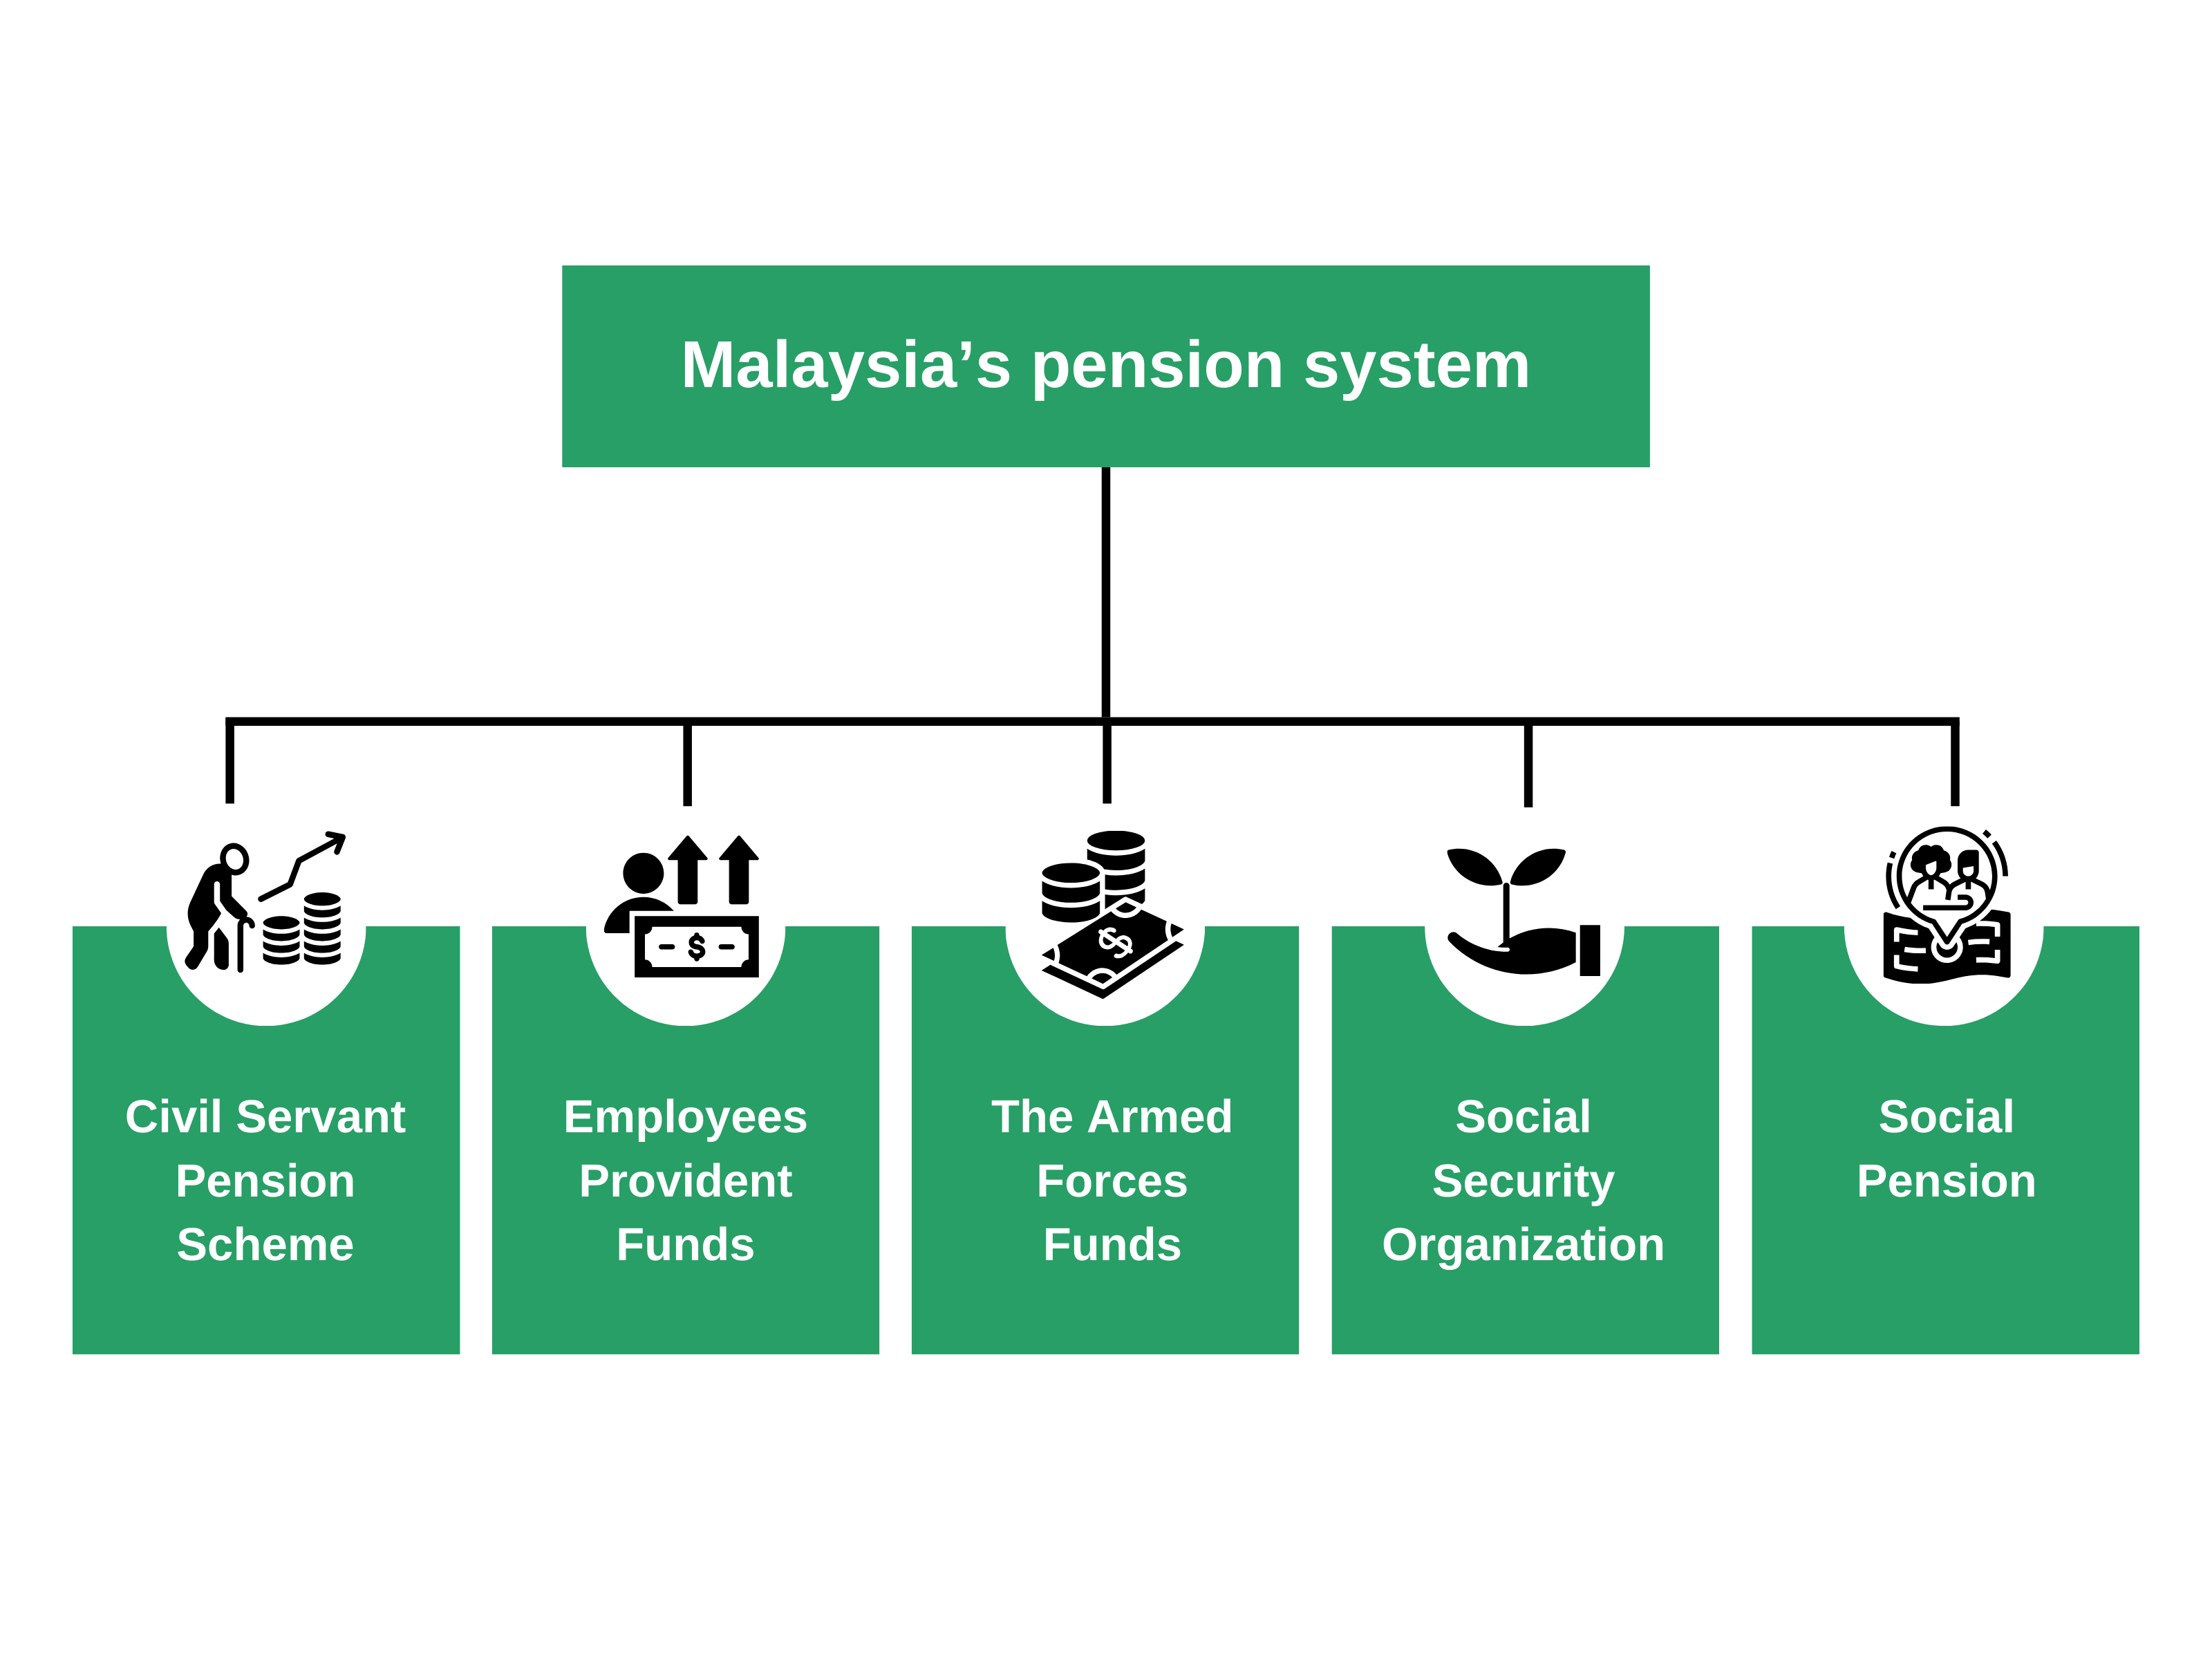 Insecurity in Old Age: A Comparative Case Study of Social Pension Programs between Indonesia and Malaysia